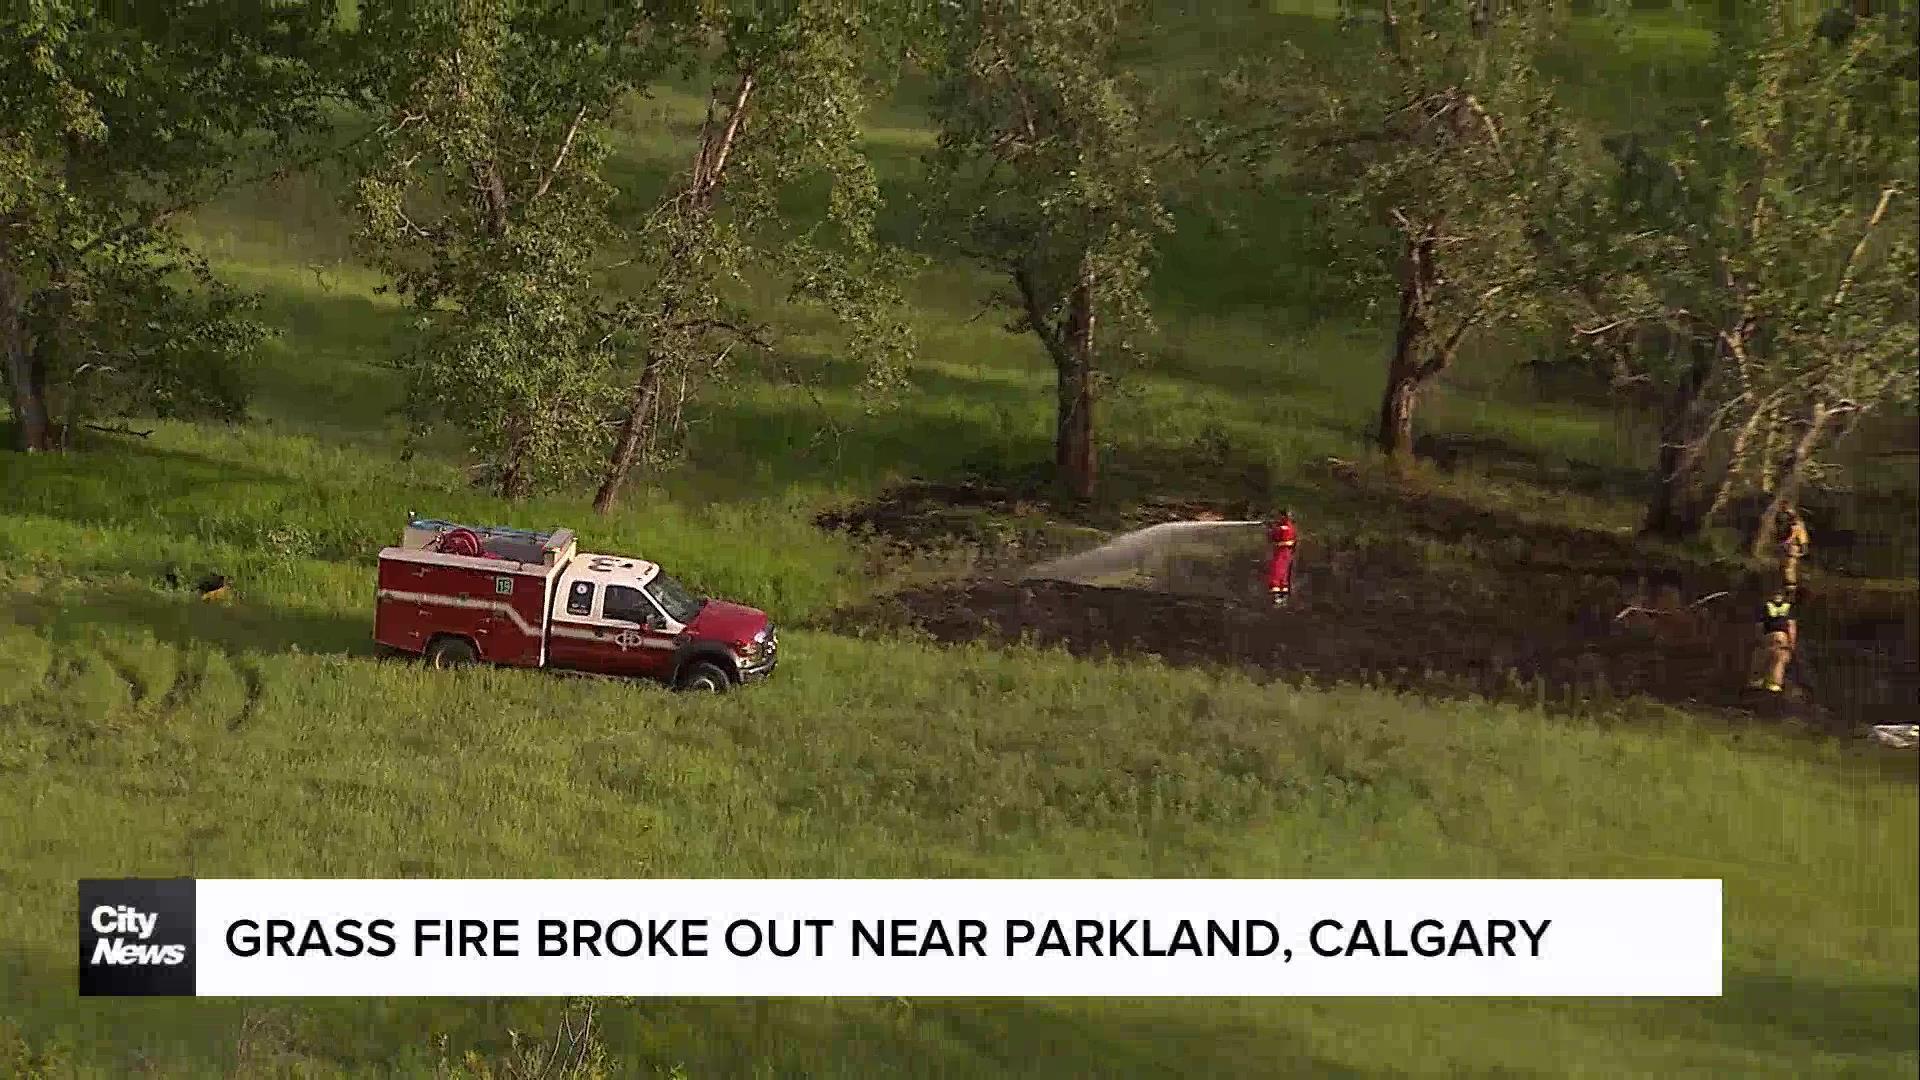 Grass fire broke out near Parkland community in Calgary